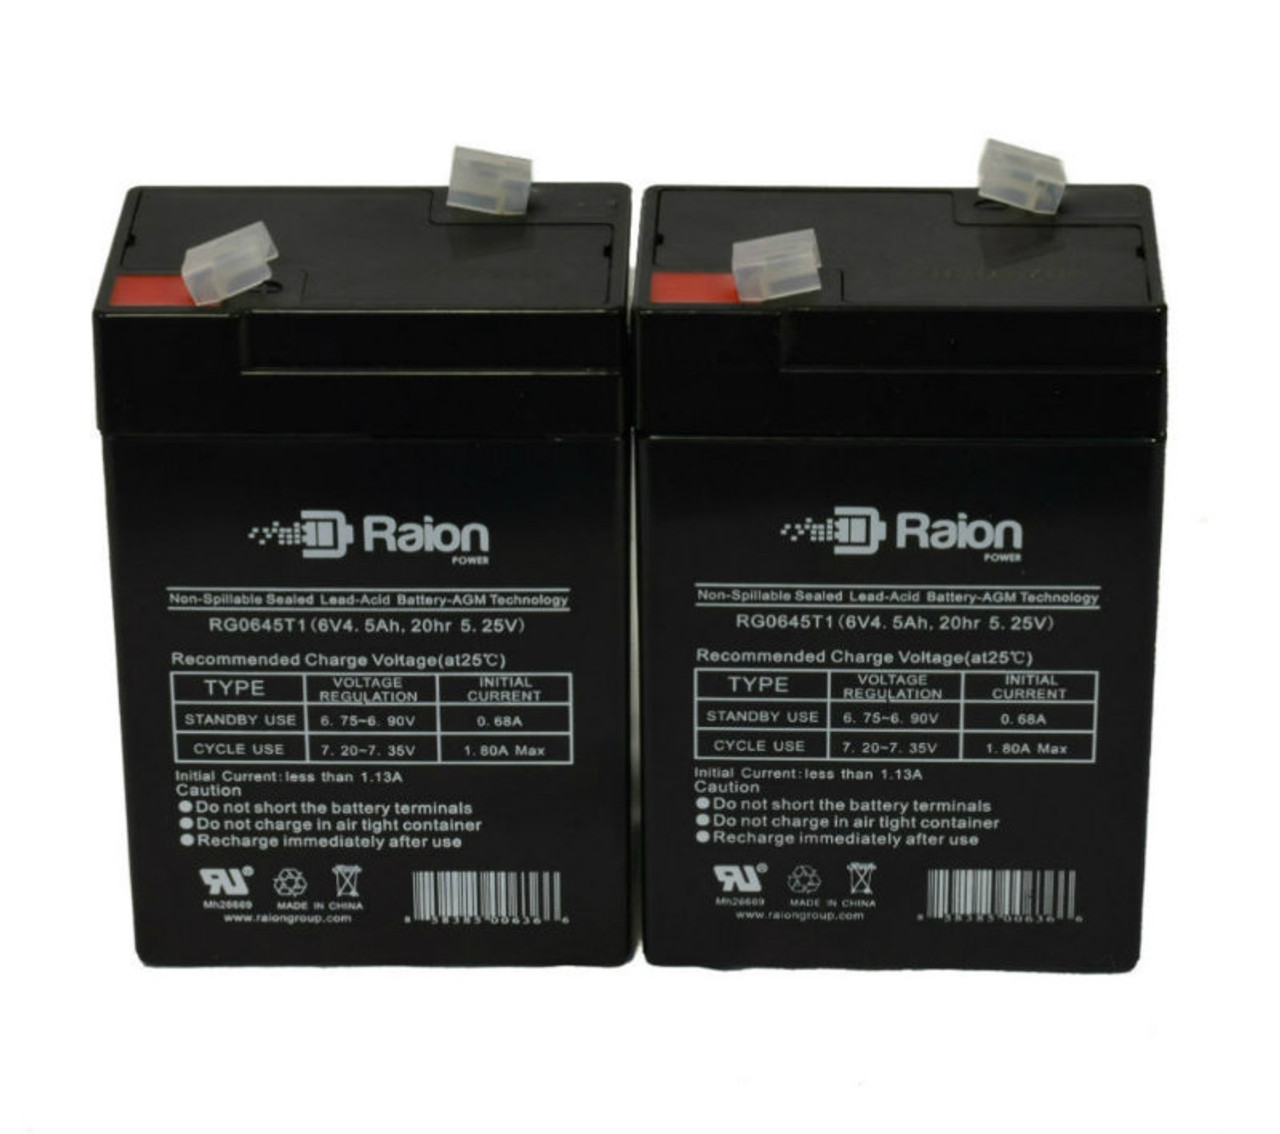 Raion Power 6 Volt 4.5Ah RG0645T1 Replacement Battery for Delta DT 6045 - 2 Pack